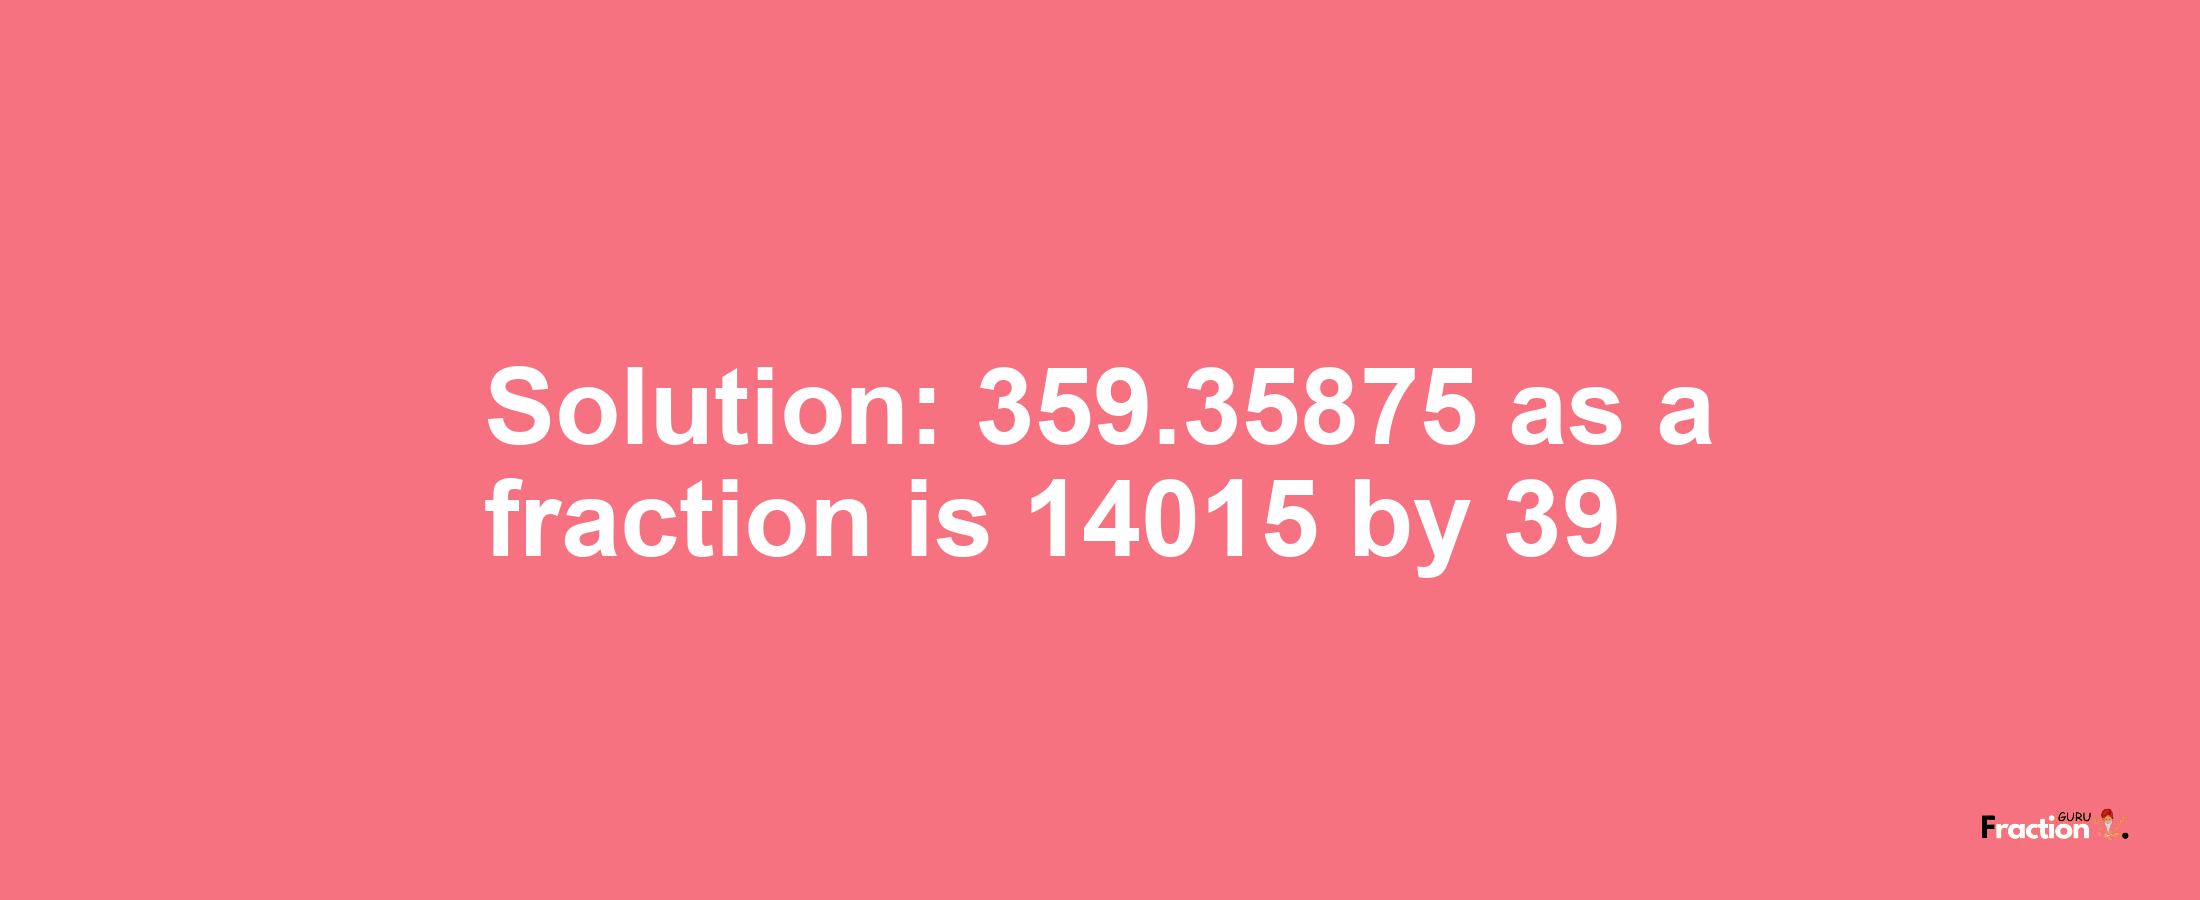 Solution:359.35875 as a fraction is 14015/39